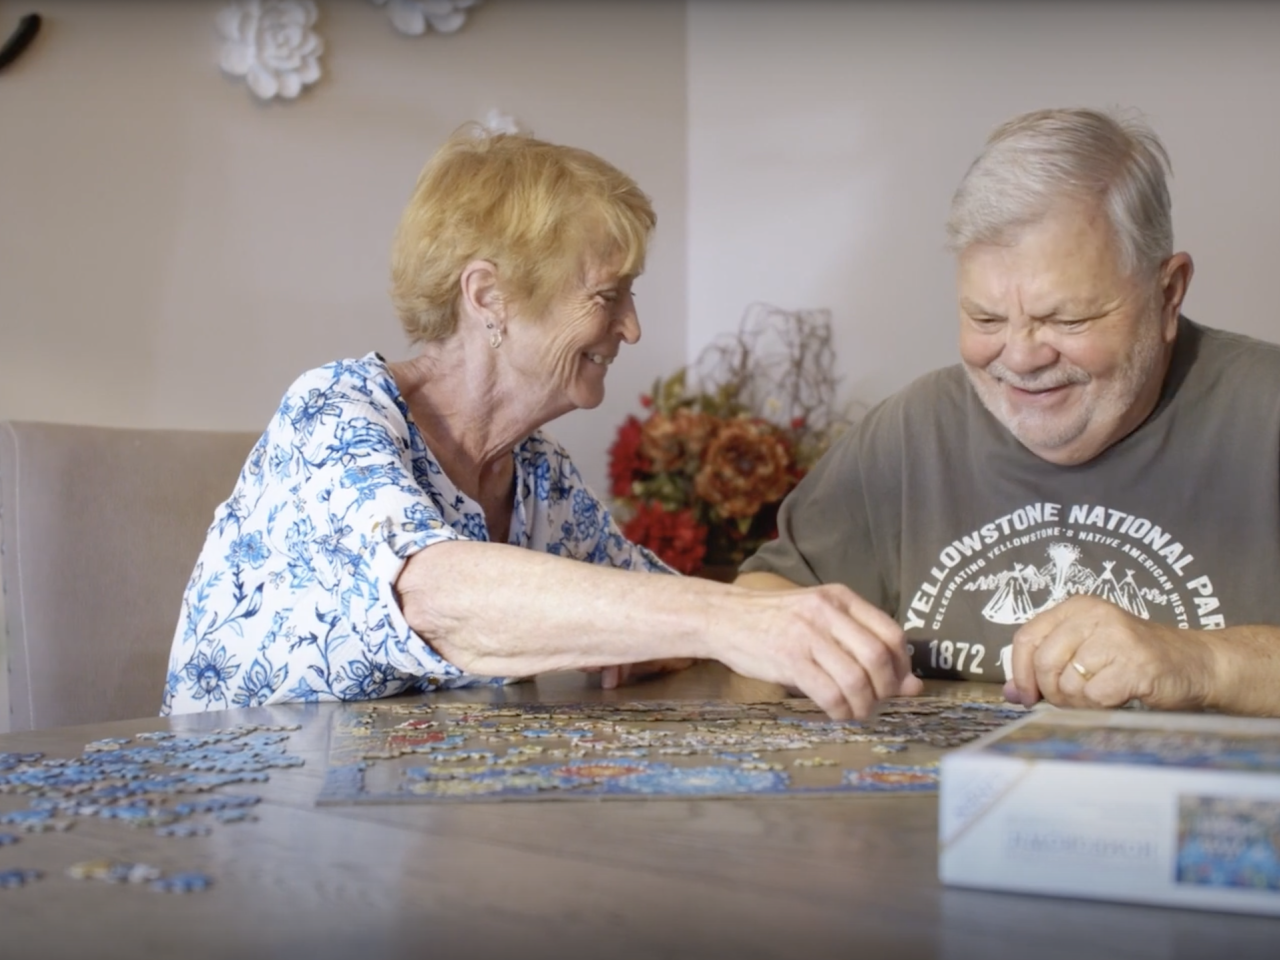 Marion and her husband working on a jigsaw puzzle together